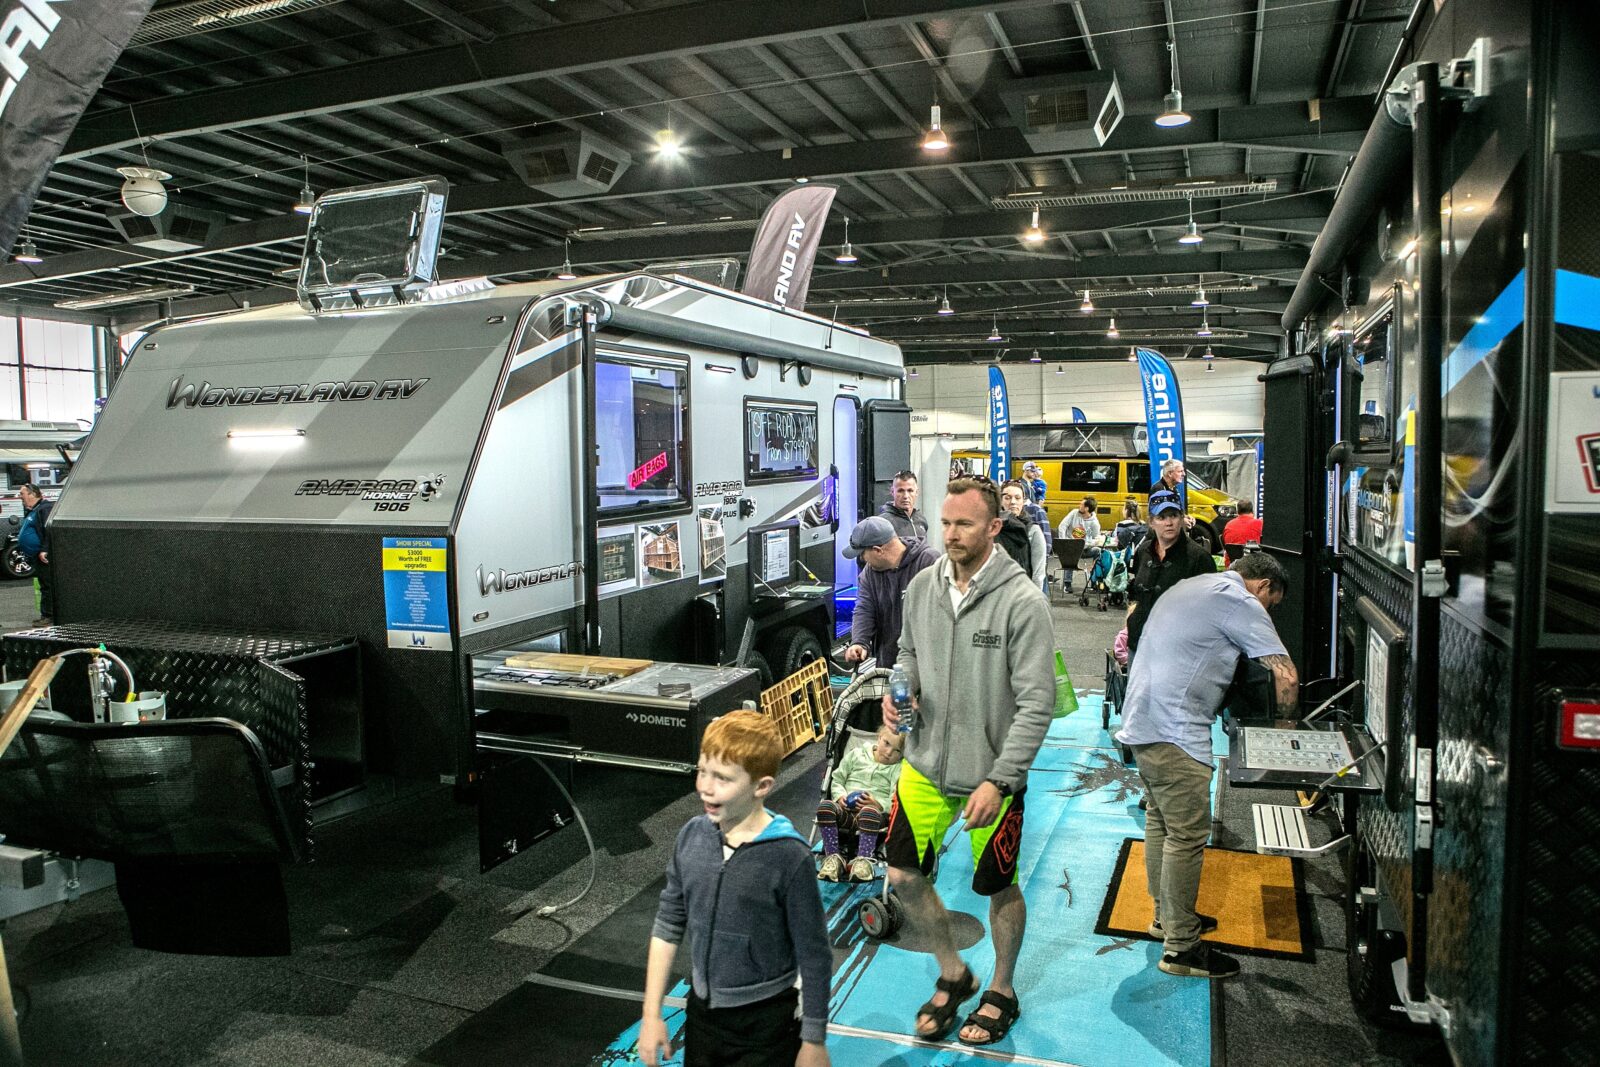 Canberra Caravan & Camping Lifestyle Expo